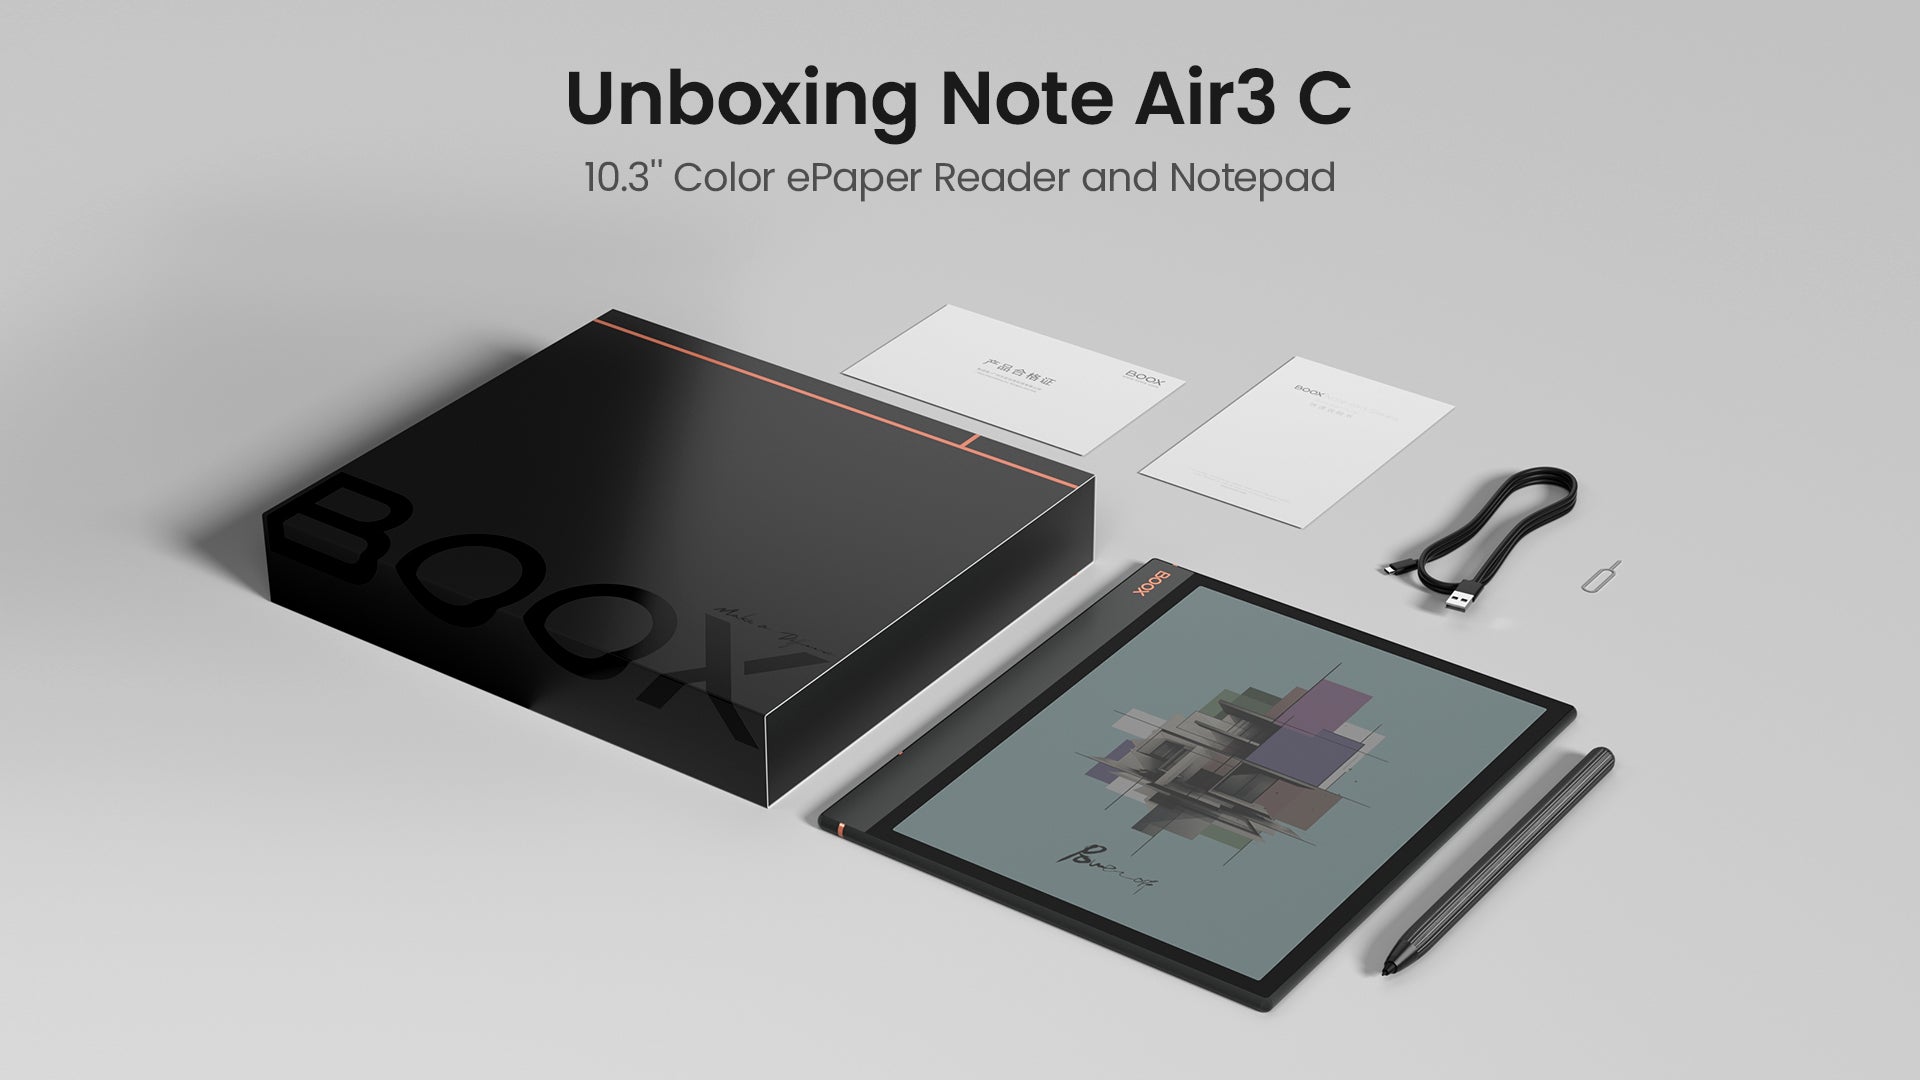 What is the difference between the Boox Note Air3 & Boox Note Air2